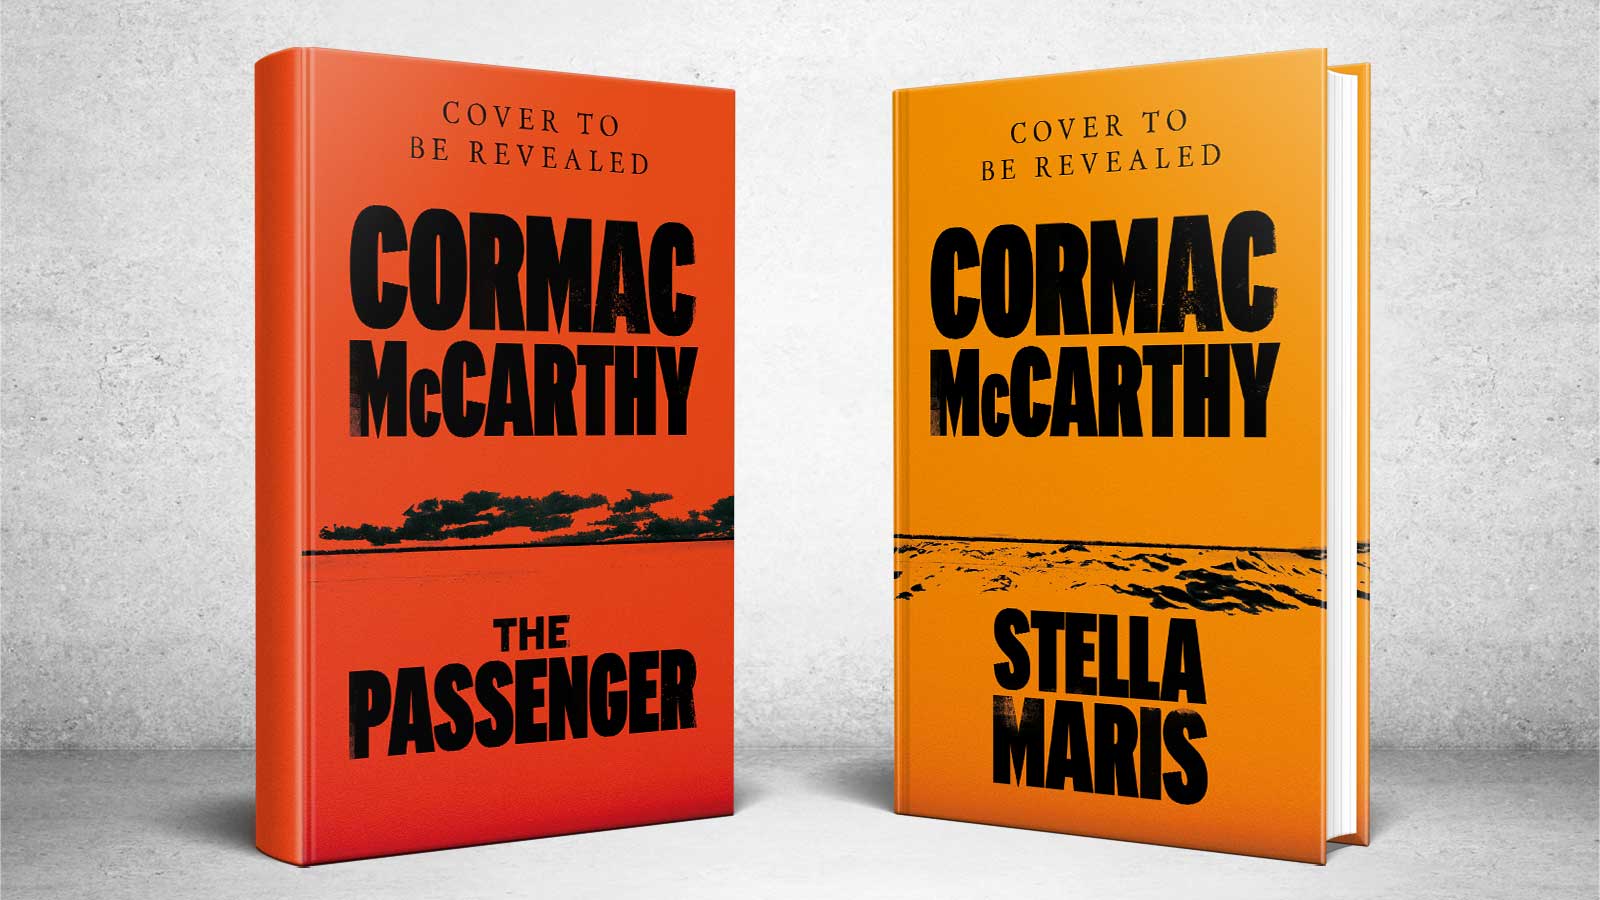 Two new books from Cormac McCarthy: The Passenger and Stella Maris standing next to each other against a stone coloured background